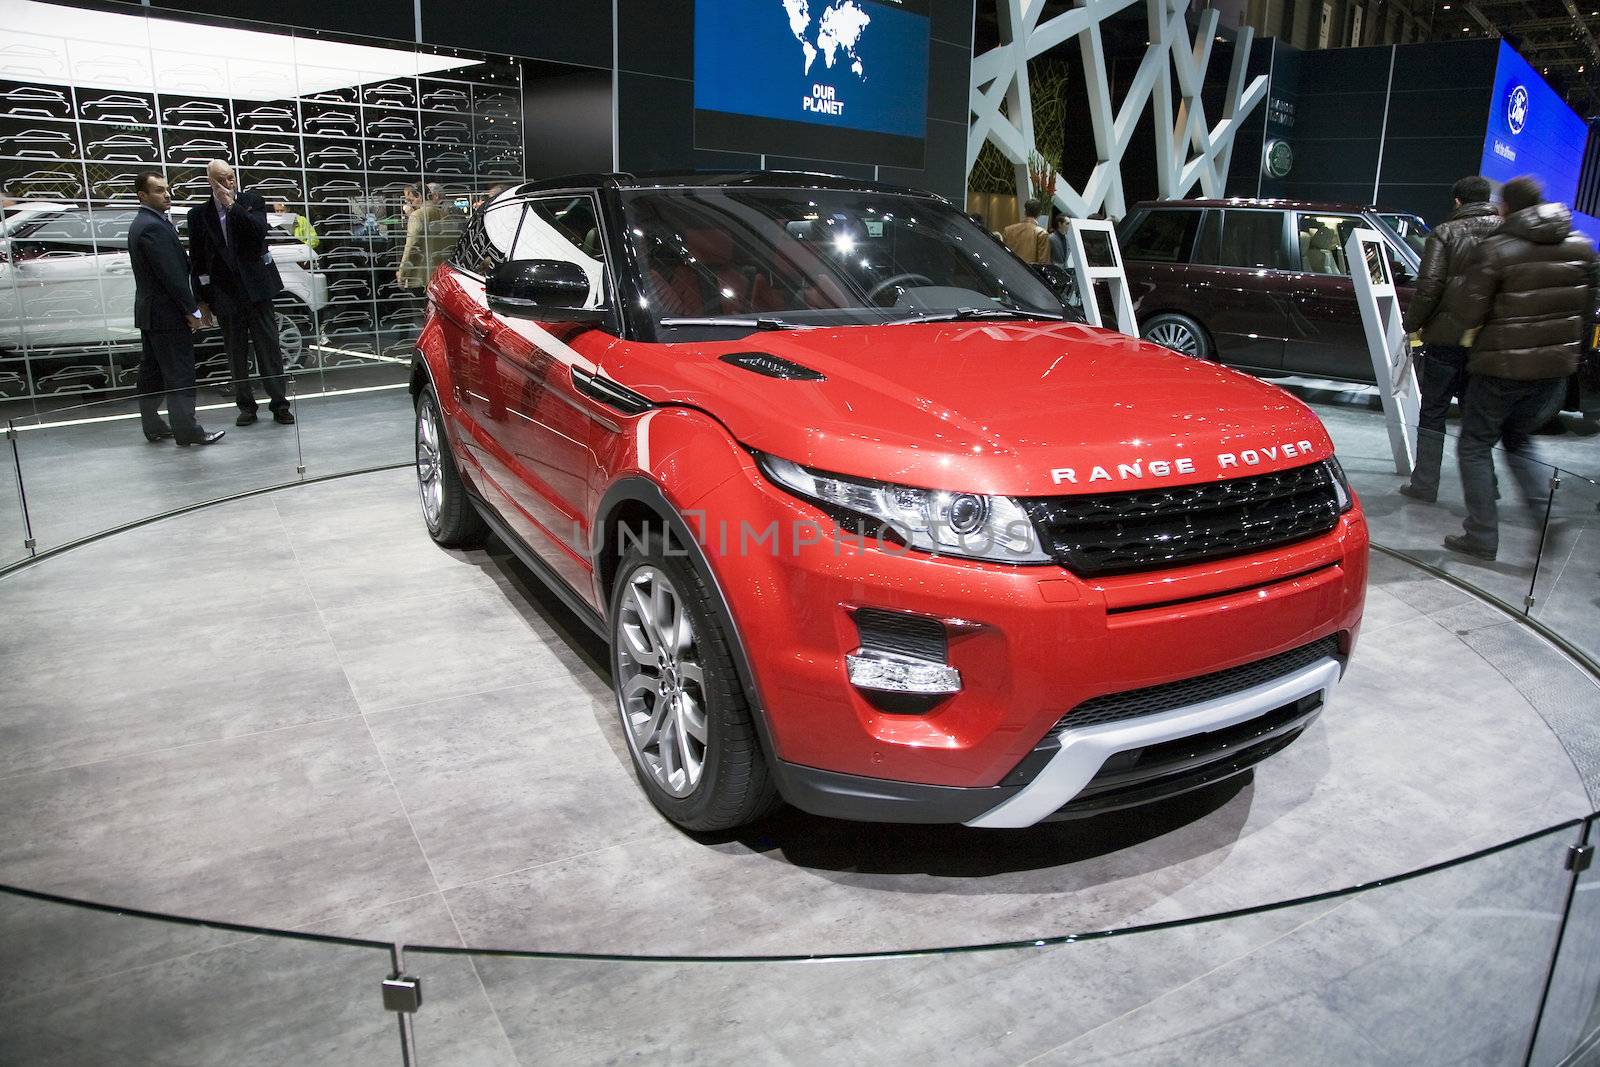 GENEVA, SWITZERLAND - MARCH 4, 2011 - Range Rover Evoque Coupe is presented at the annual motor show in Geneva on March 4, 2011.